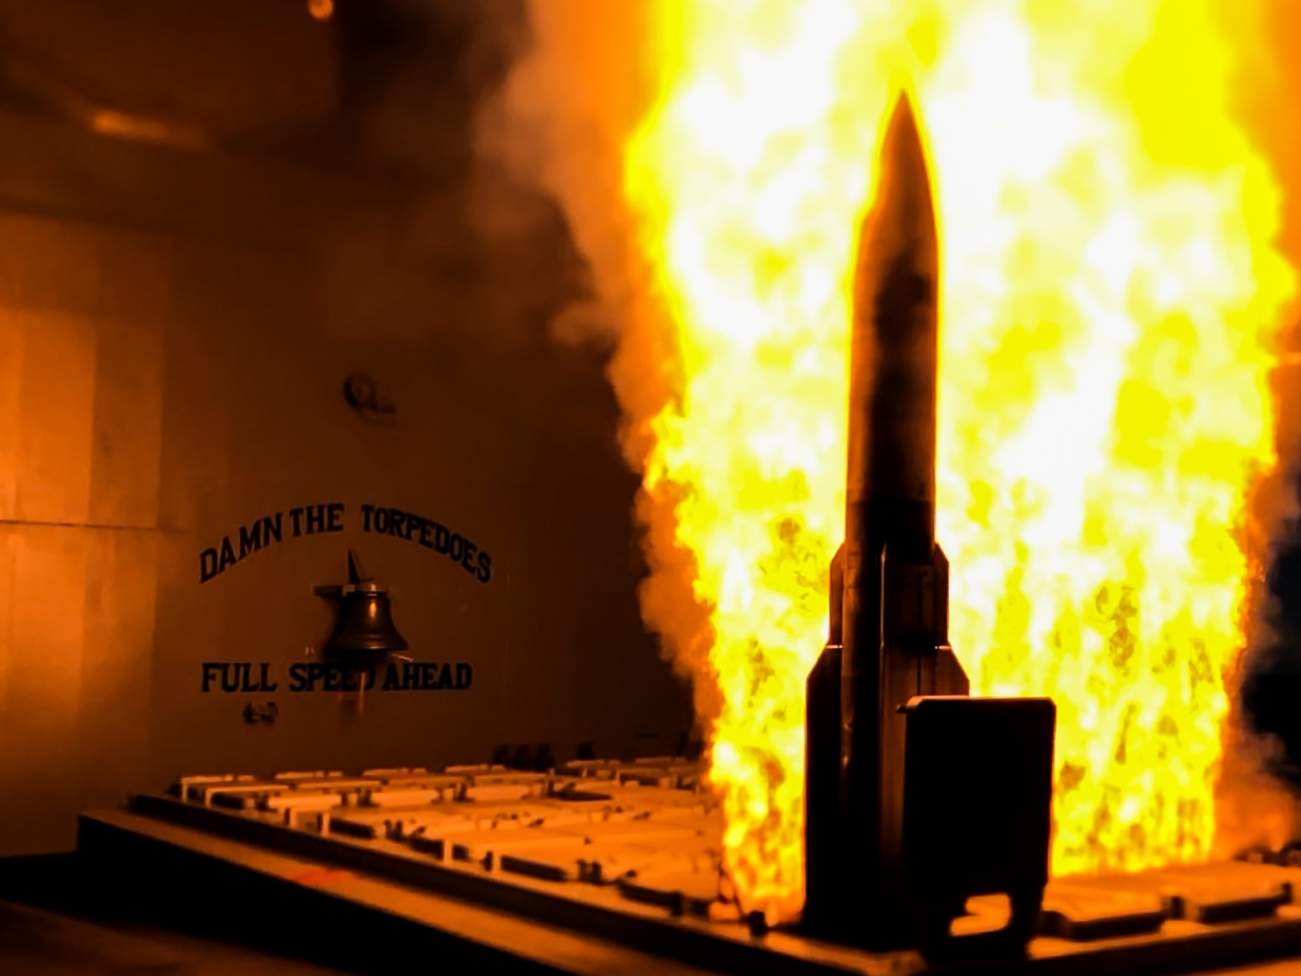 The U.S. Navy’s New Missile Defense Is a Bad Idea